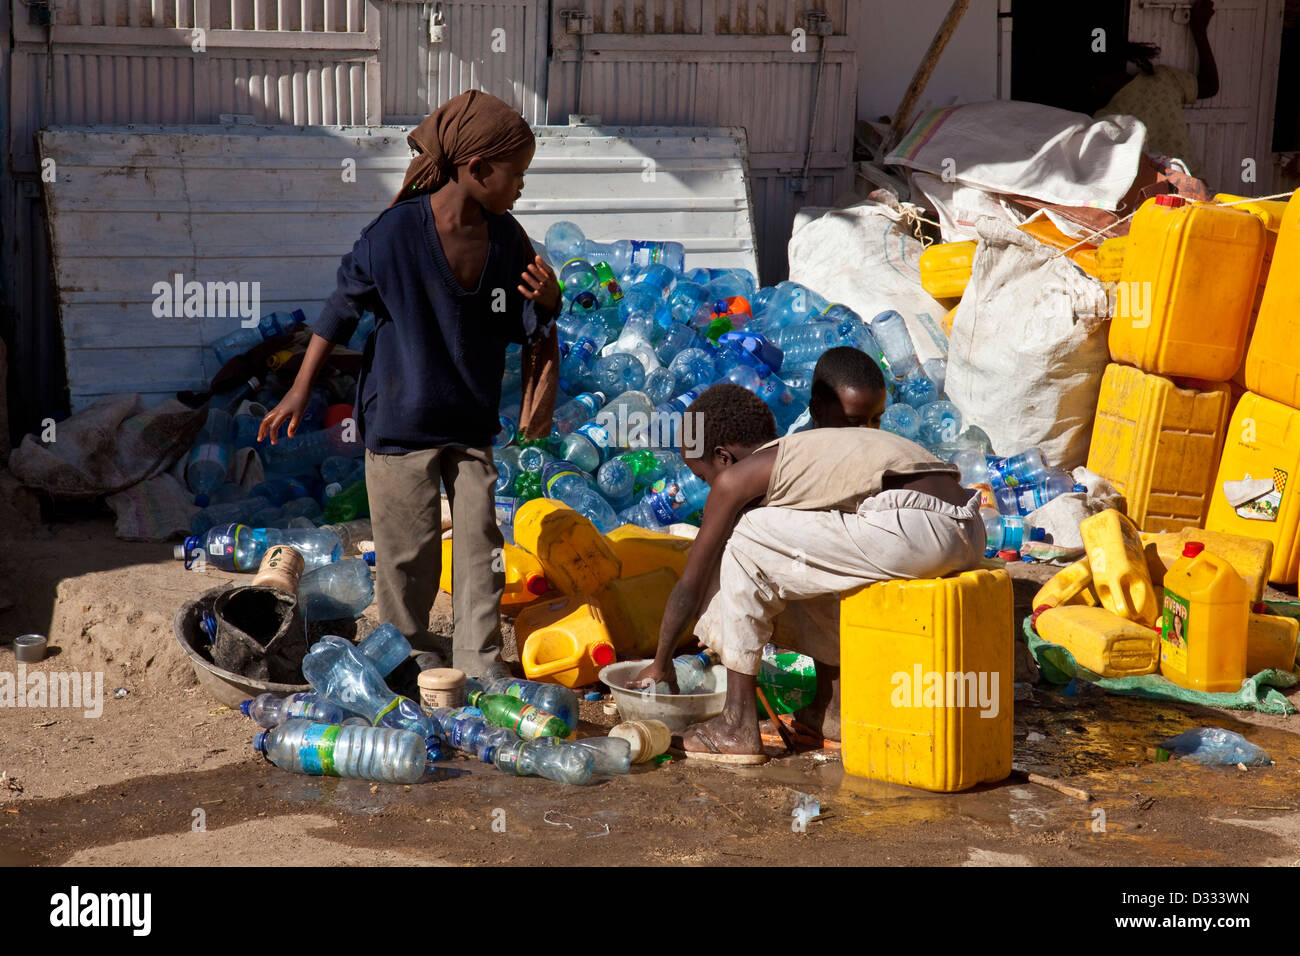 Children sorting out and cleaning plastic bottles and containers, Jugol (Old Town) Harar, Ethiopia Stock Photo